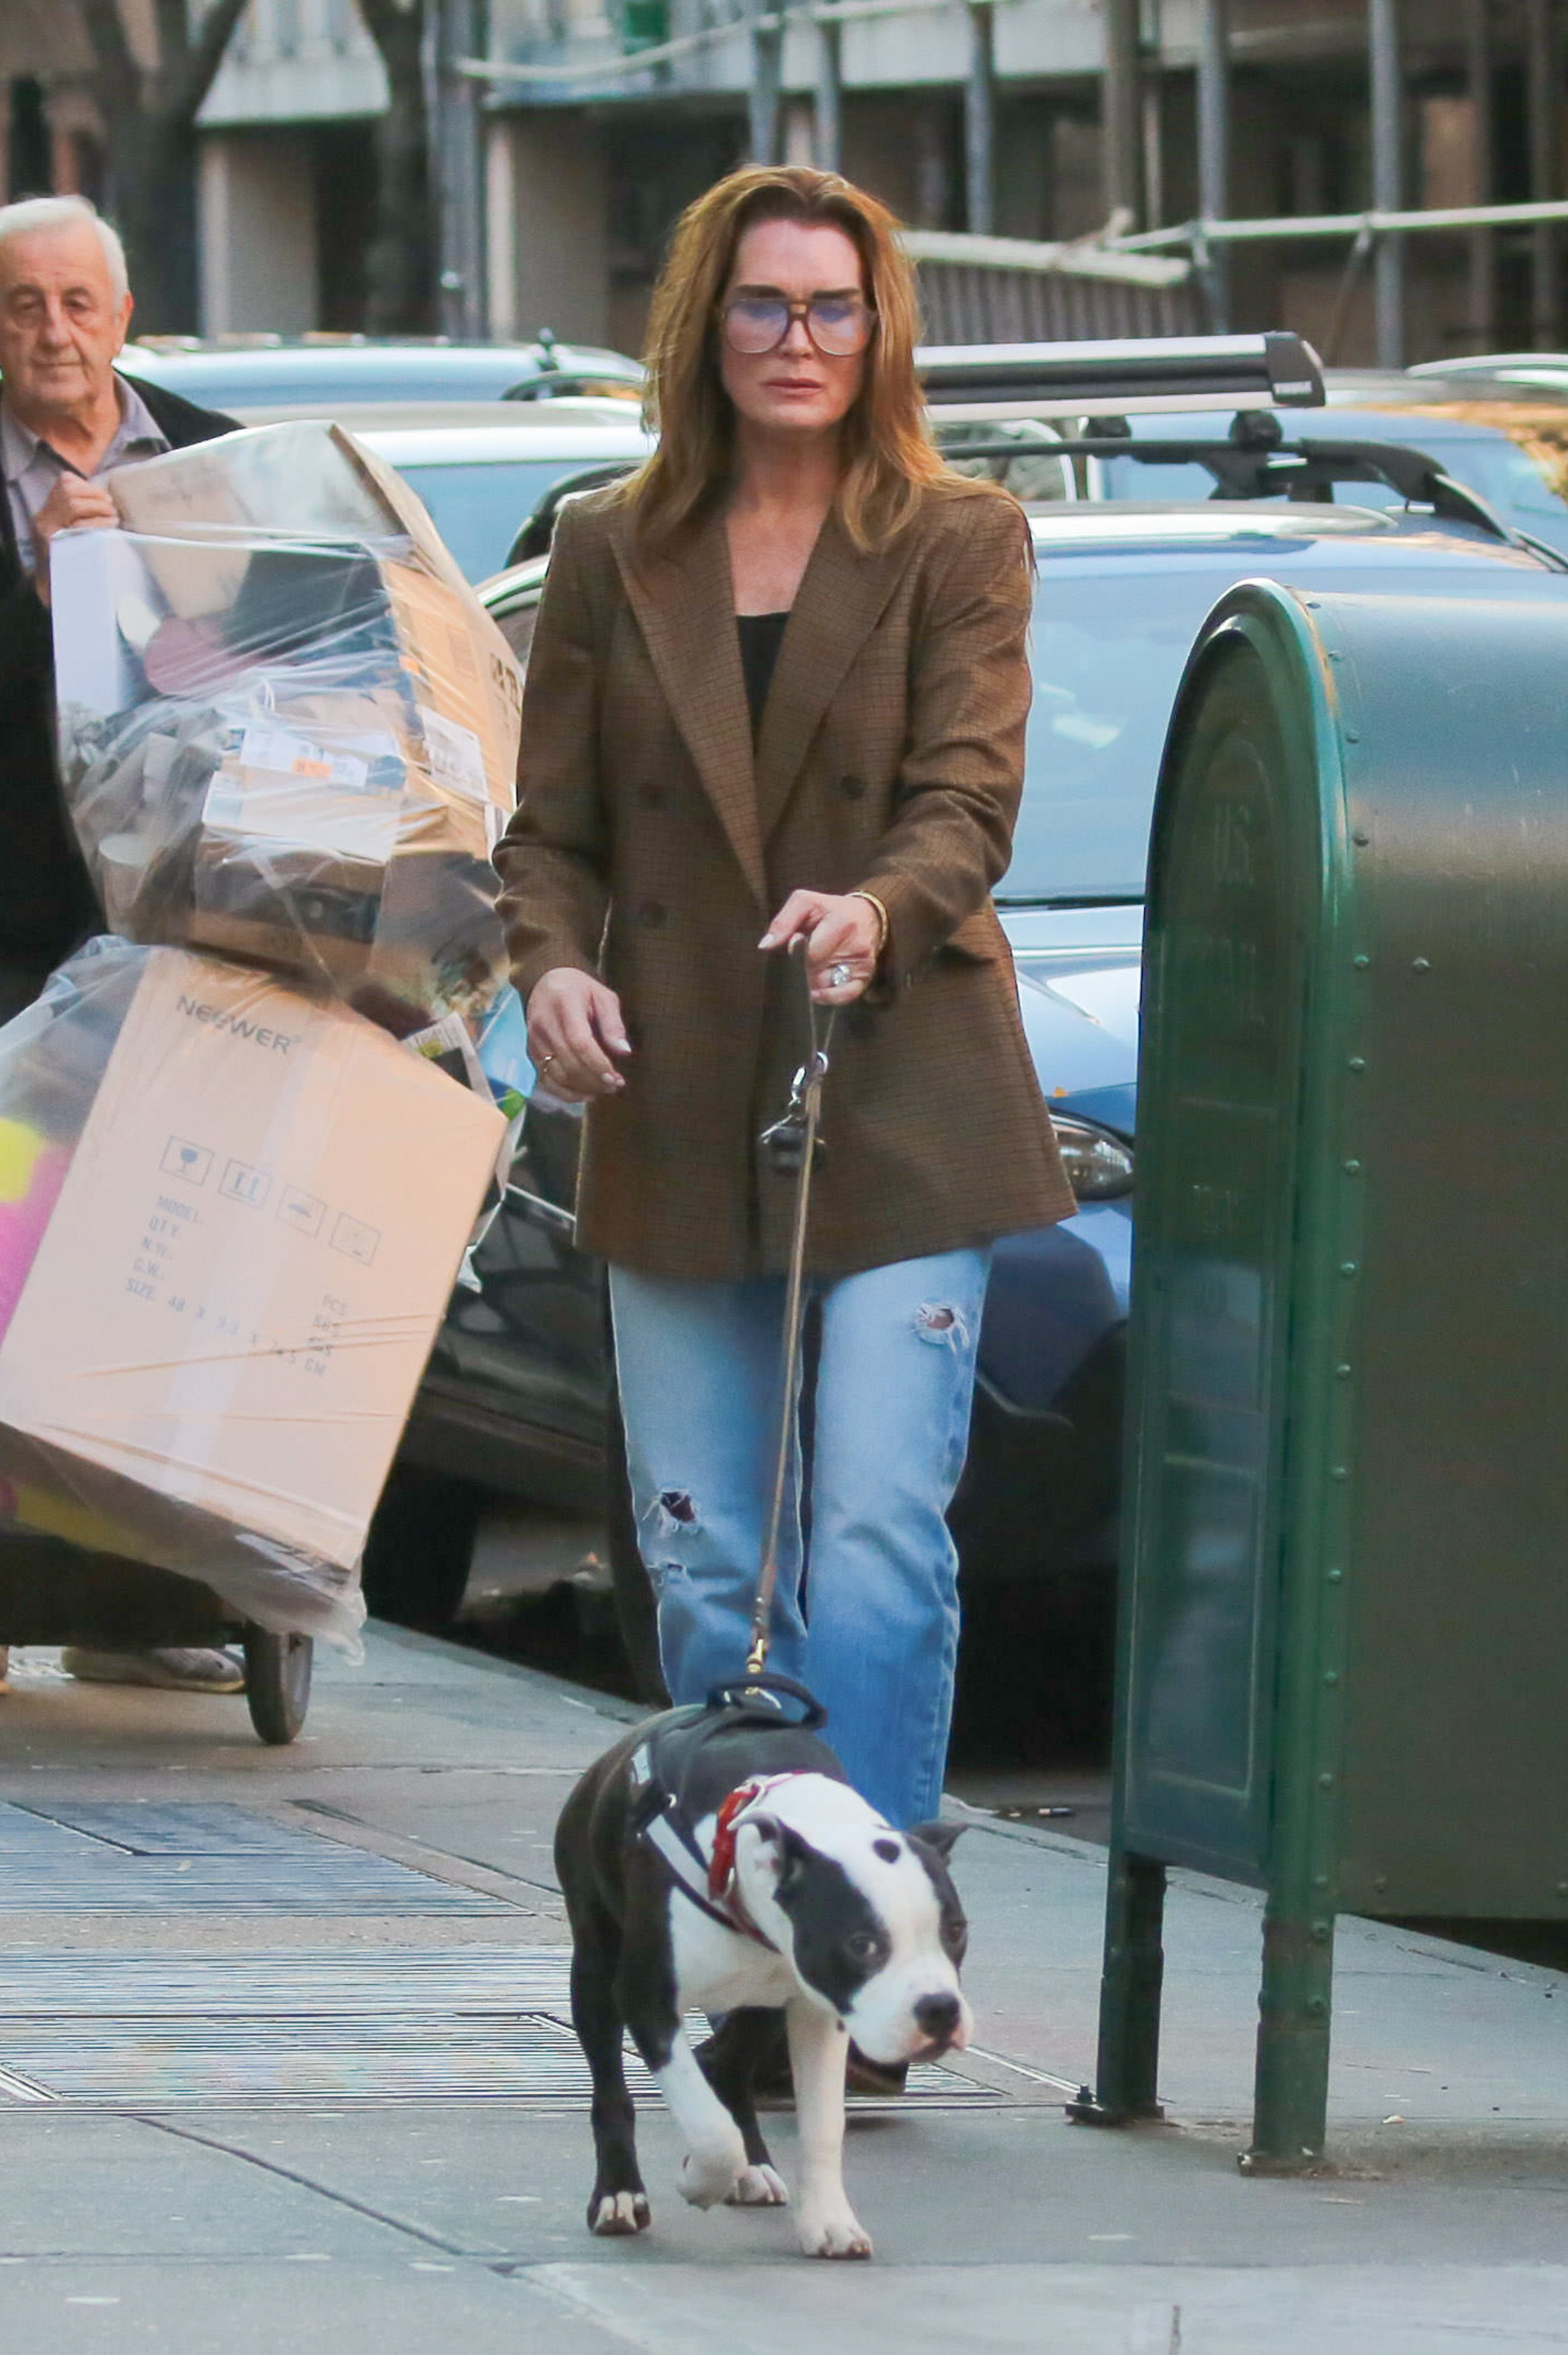 Last year, Brooke was captured showing off her timeless looks in a blazer while walking her dog